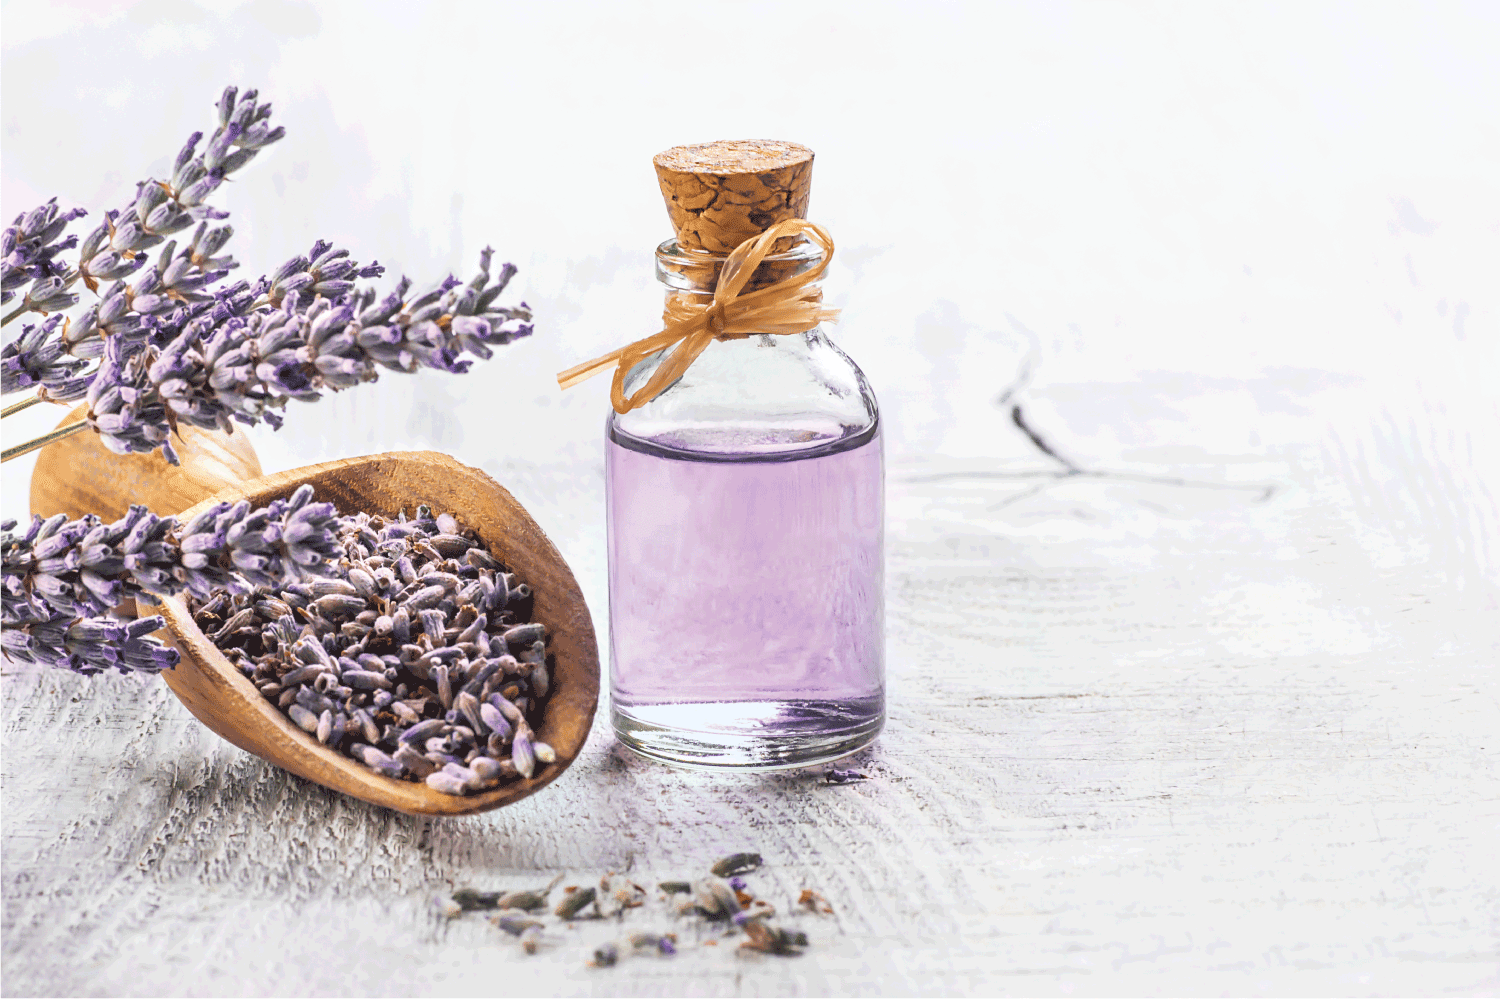 Glass bottle of Lavender essential oil with fresh lavender flowers and dried lavender seeds on white wooden rustic table